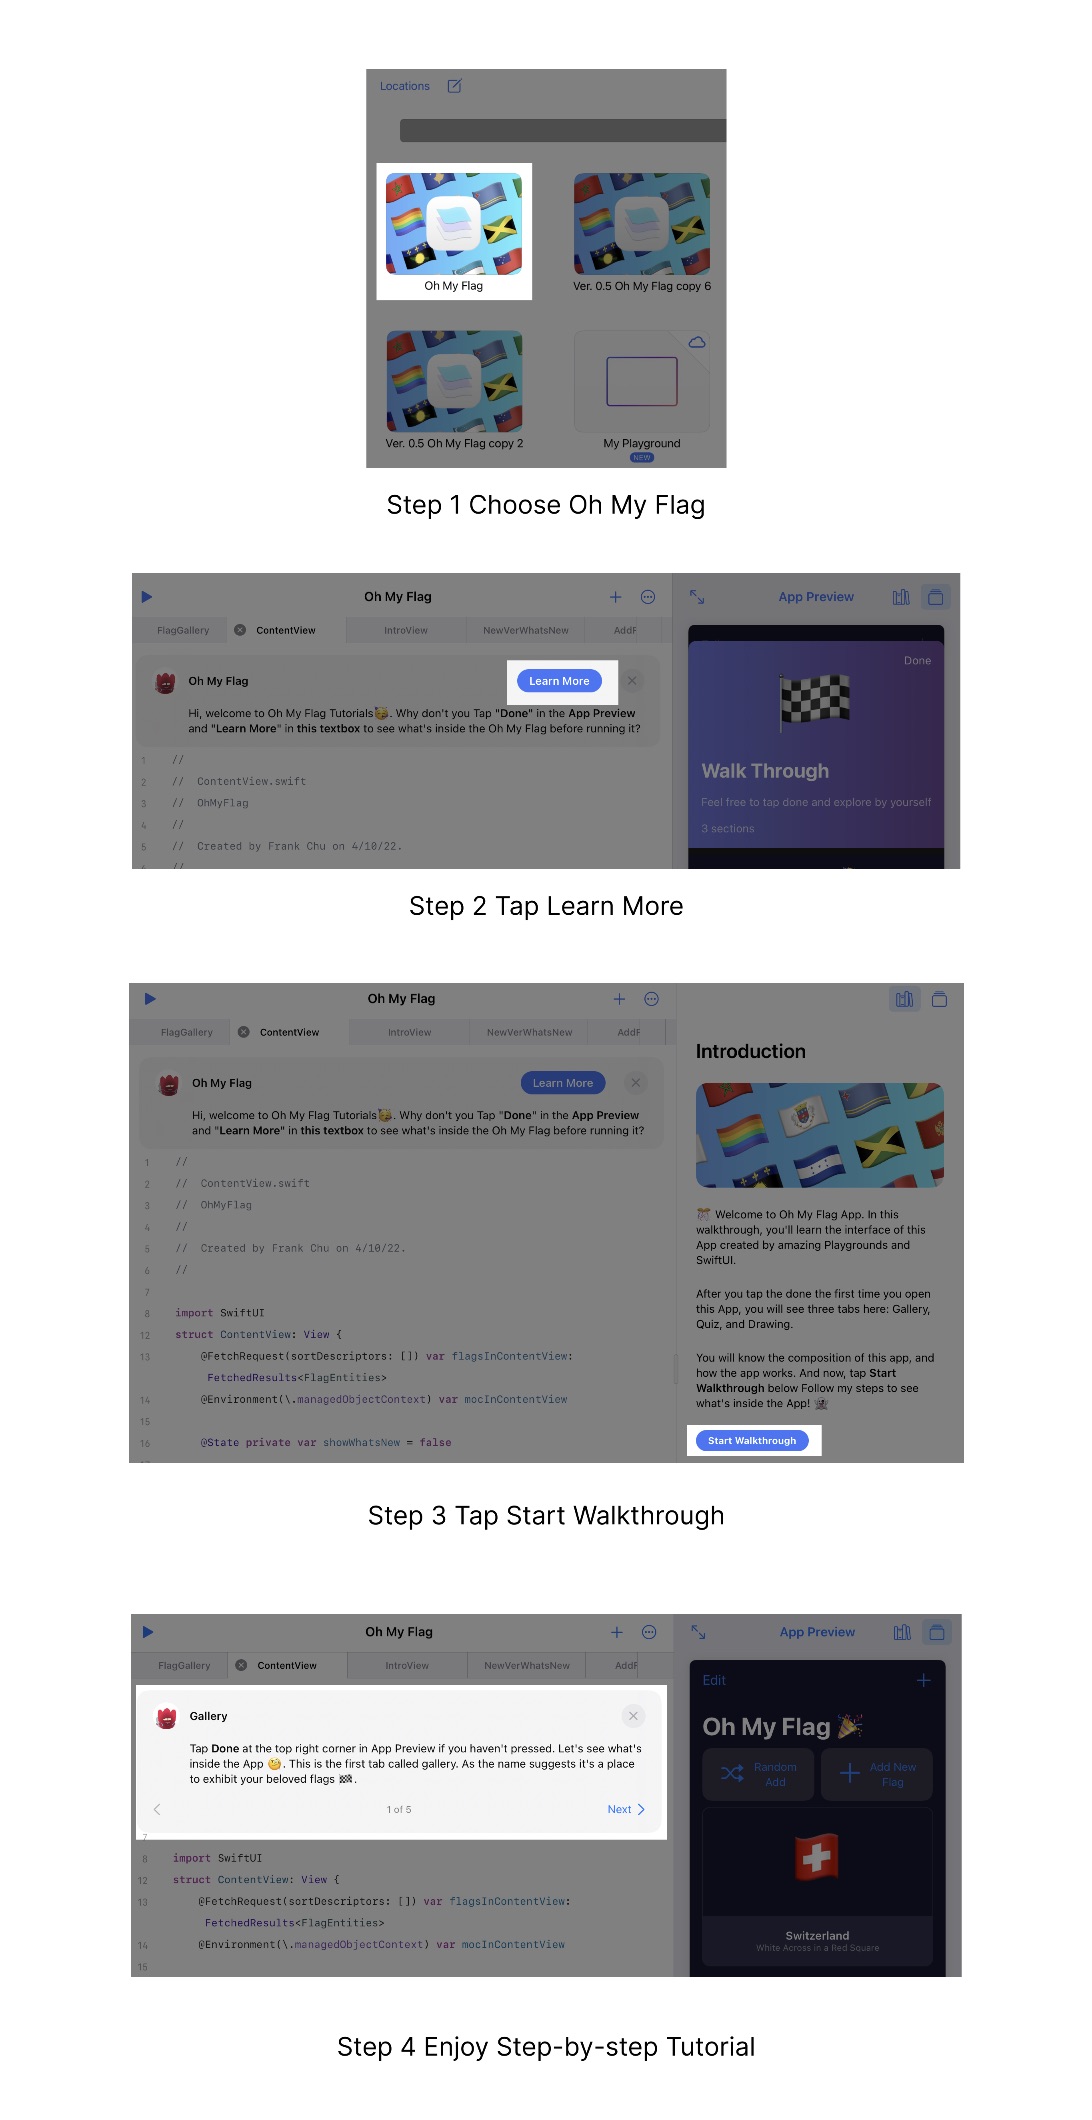 This is a readme image. There are four steps to guide people in the step-by-step tutorial